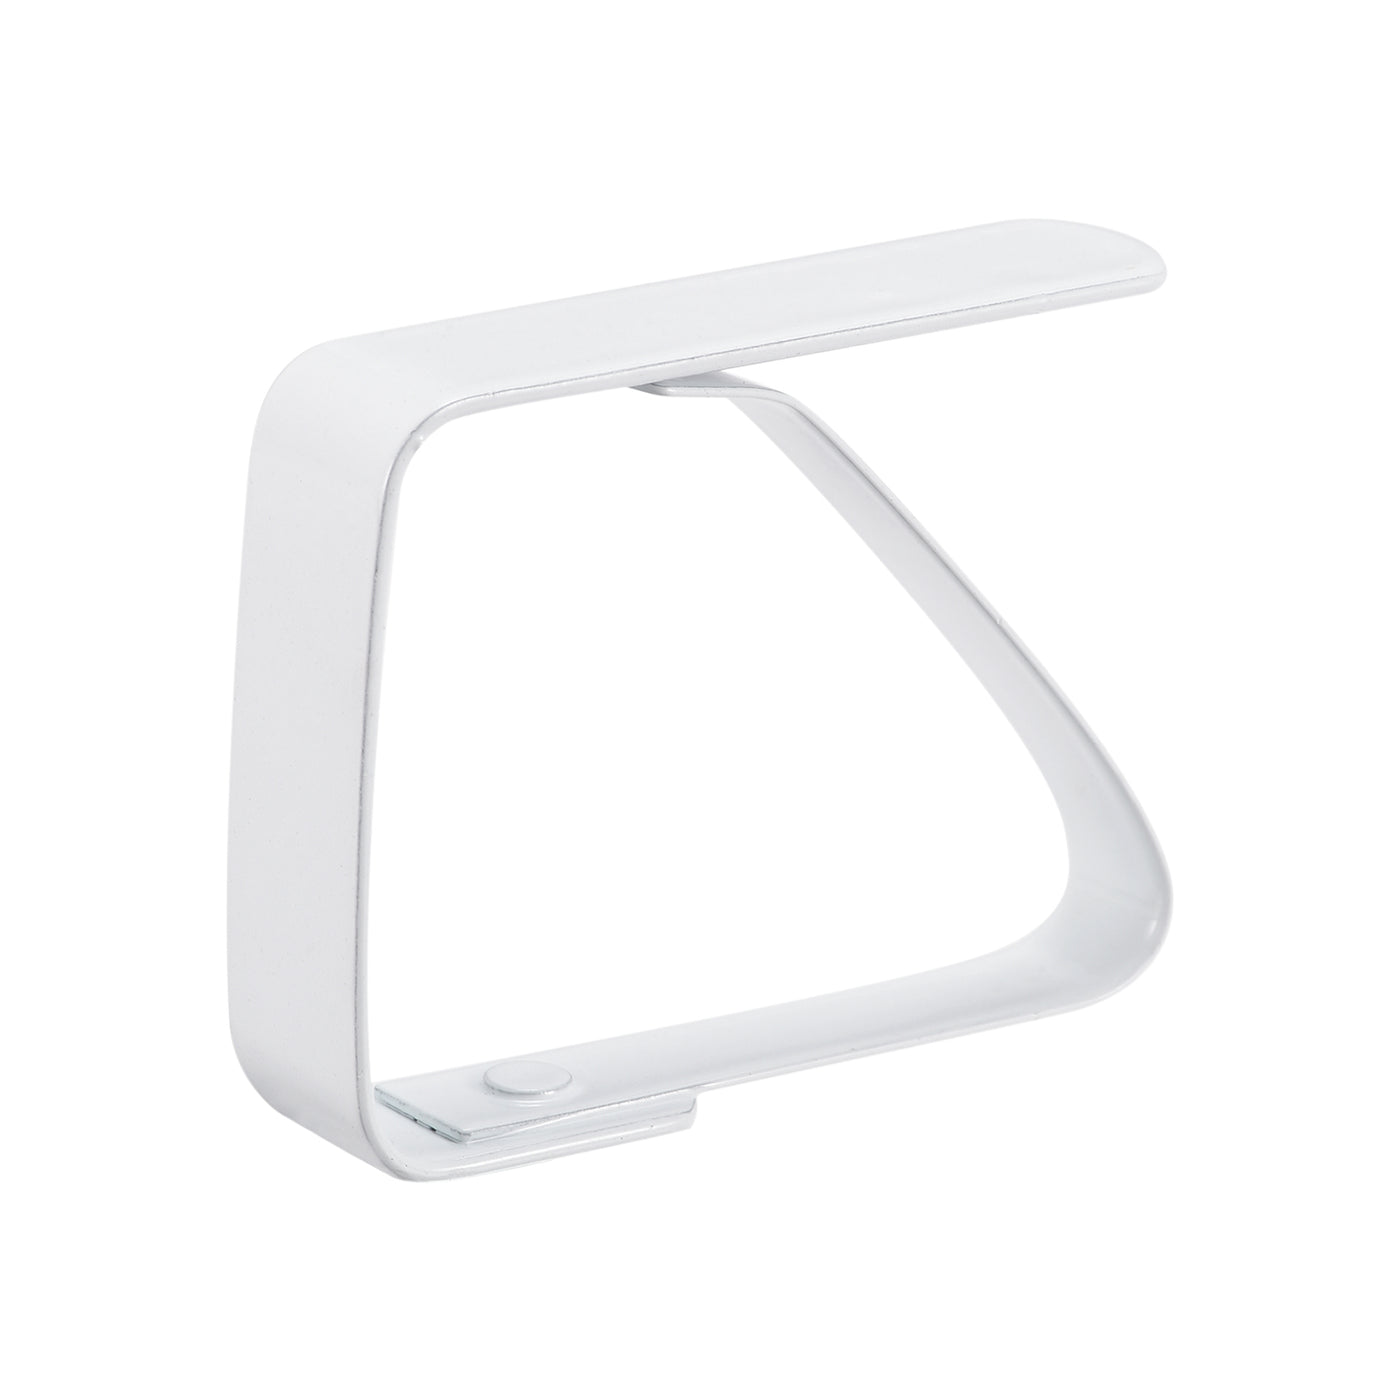 uxcell Uxcell Tablecloth Clips 50mm x 40mm 420 Stainless Steel Table Cloth Holder White 2 Pcs